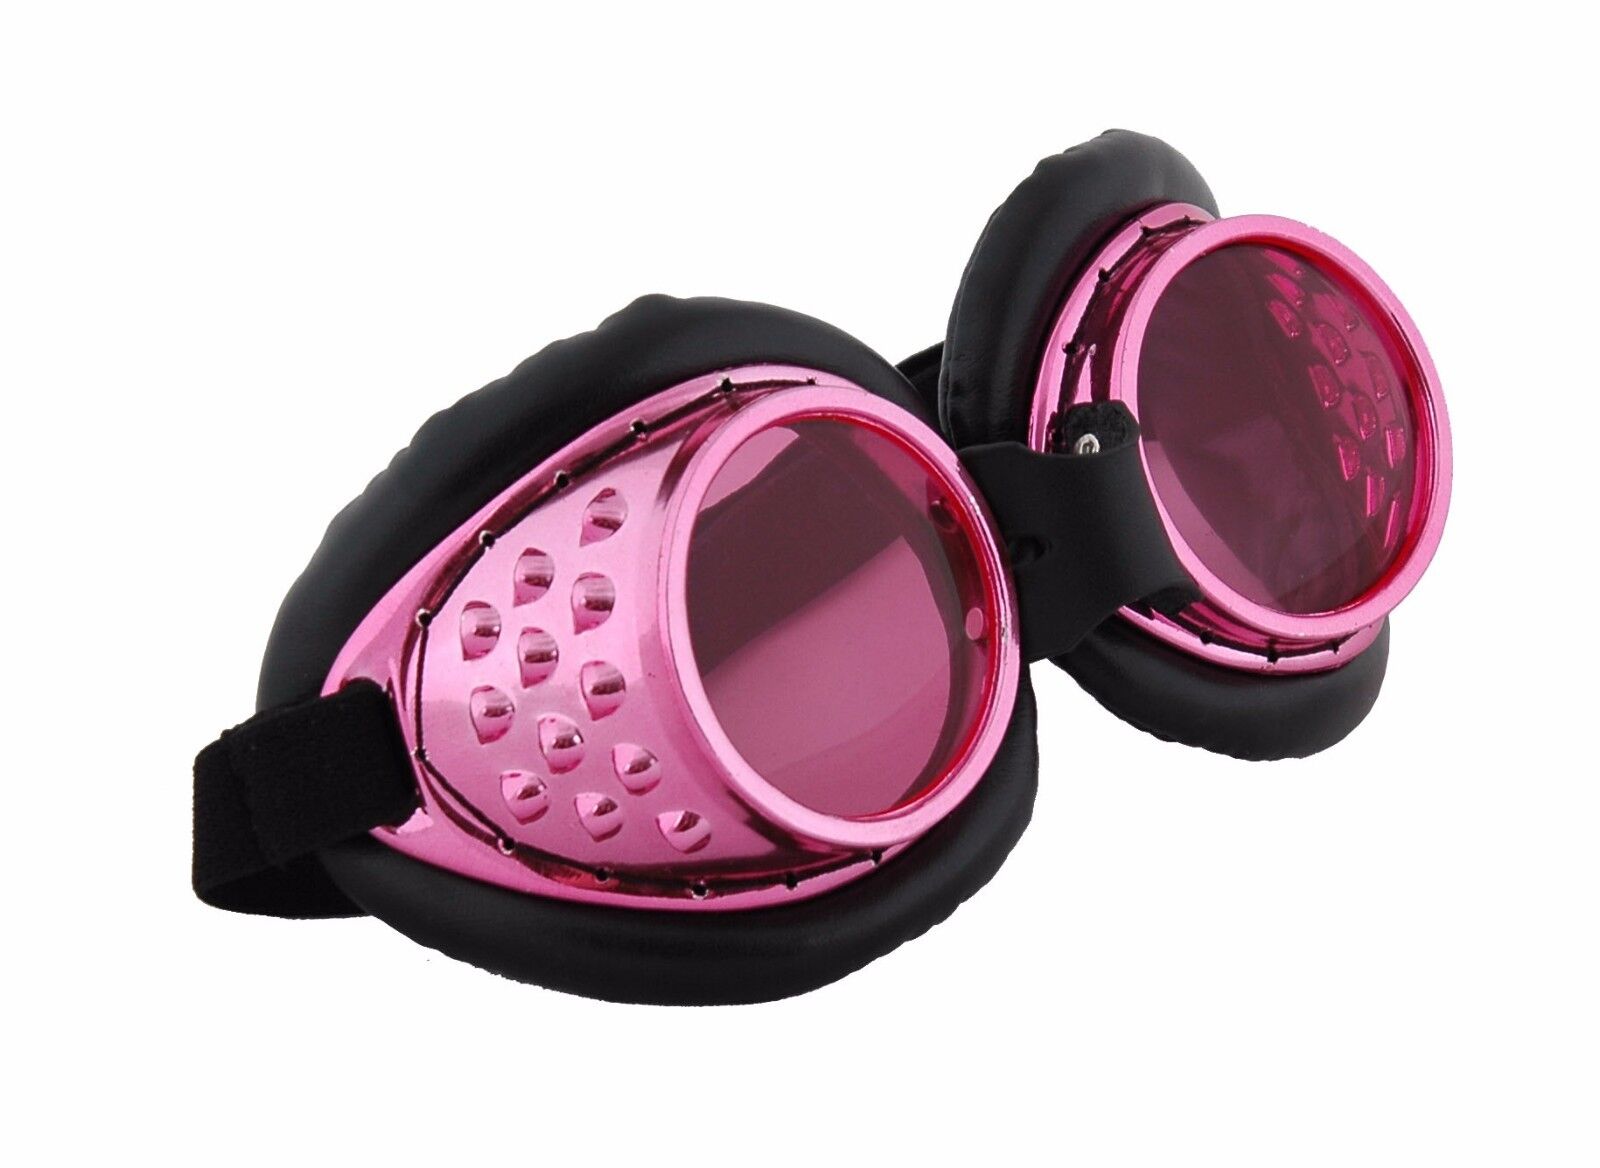 Steampunk Goggles Pink Metallic Frame 5 ☆ popular Padded Adjustable Cheap super special price Black